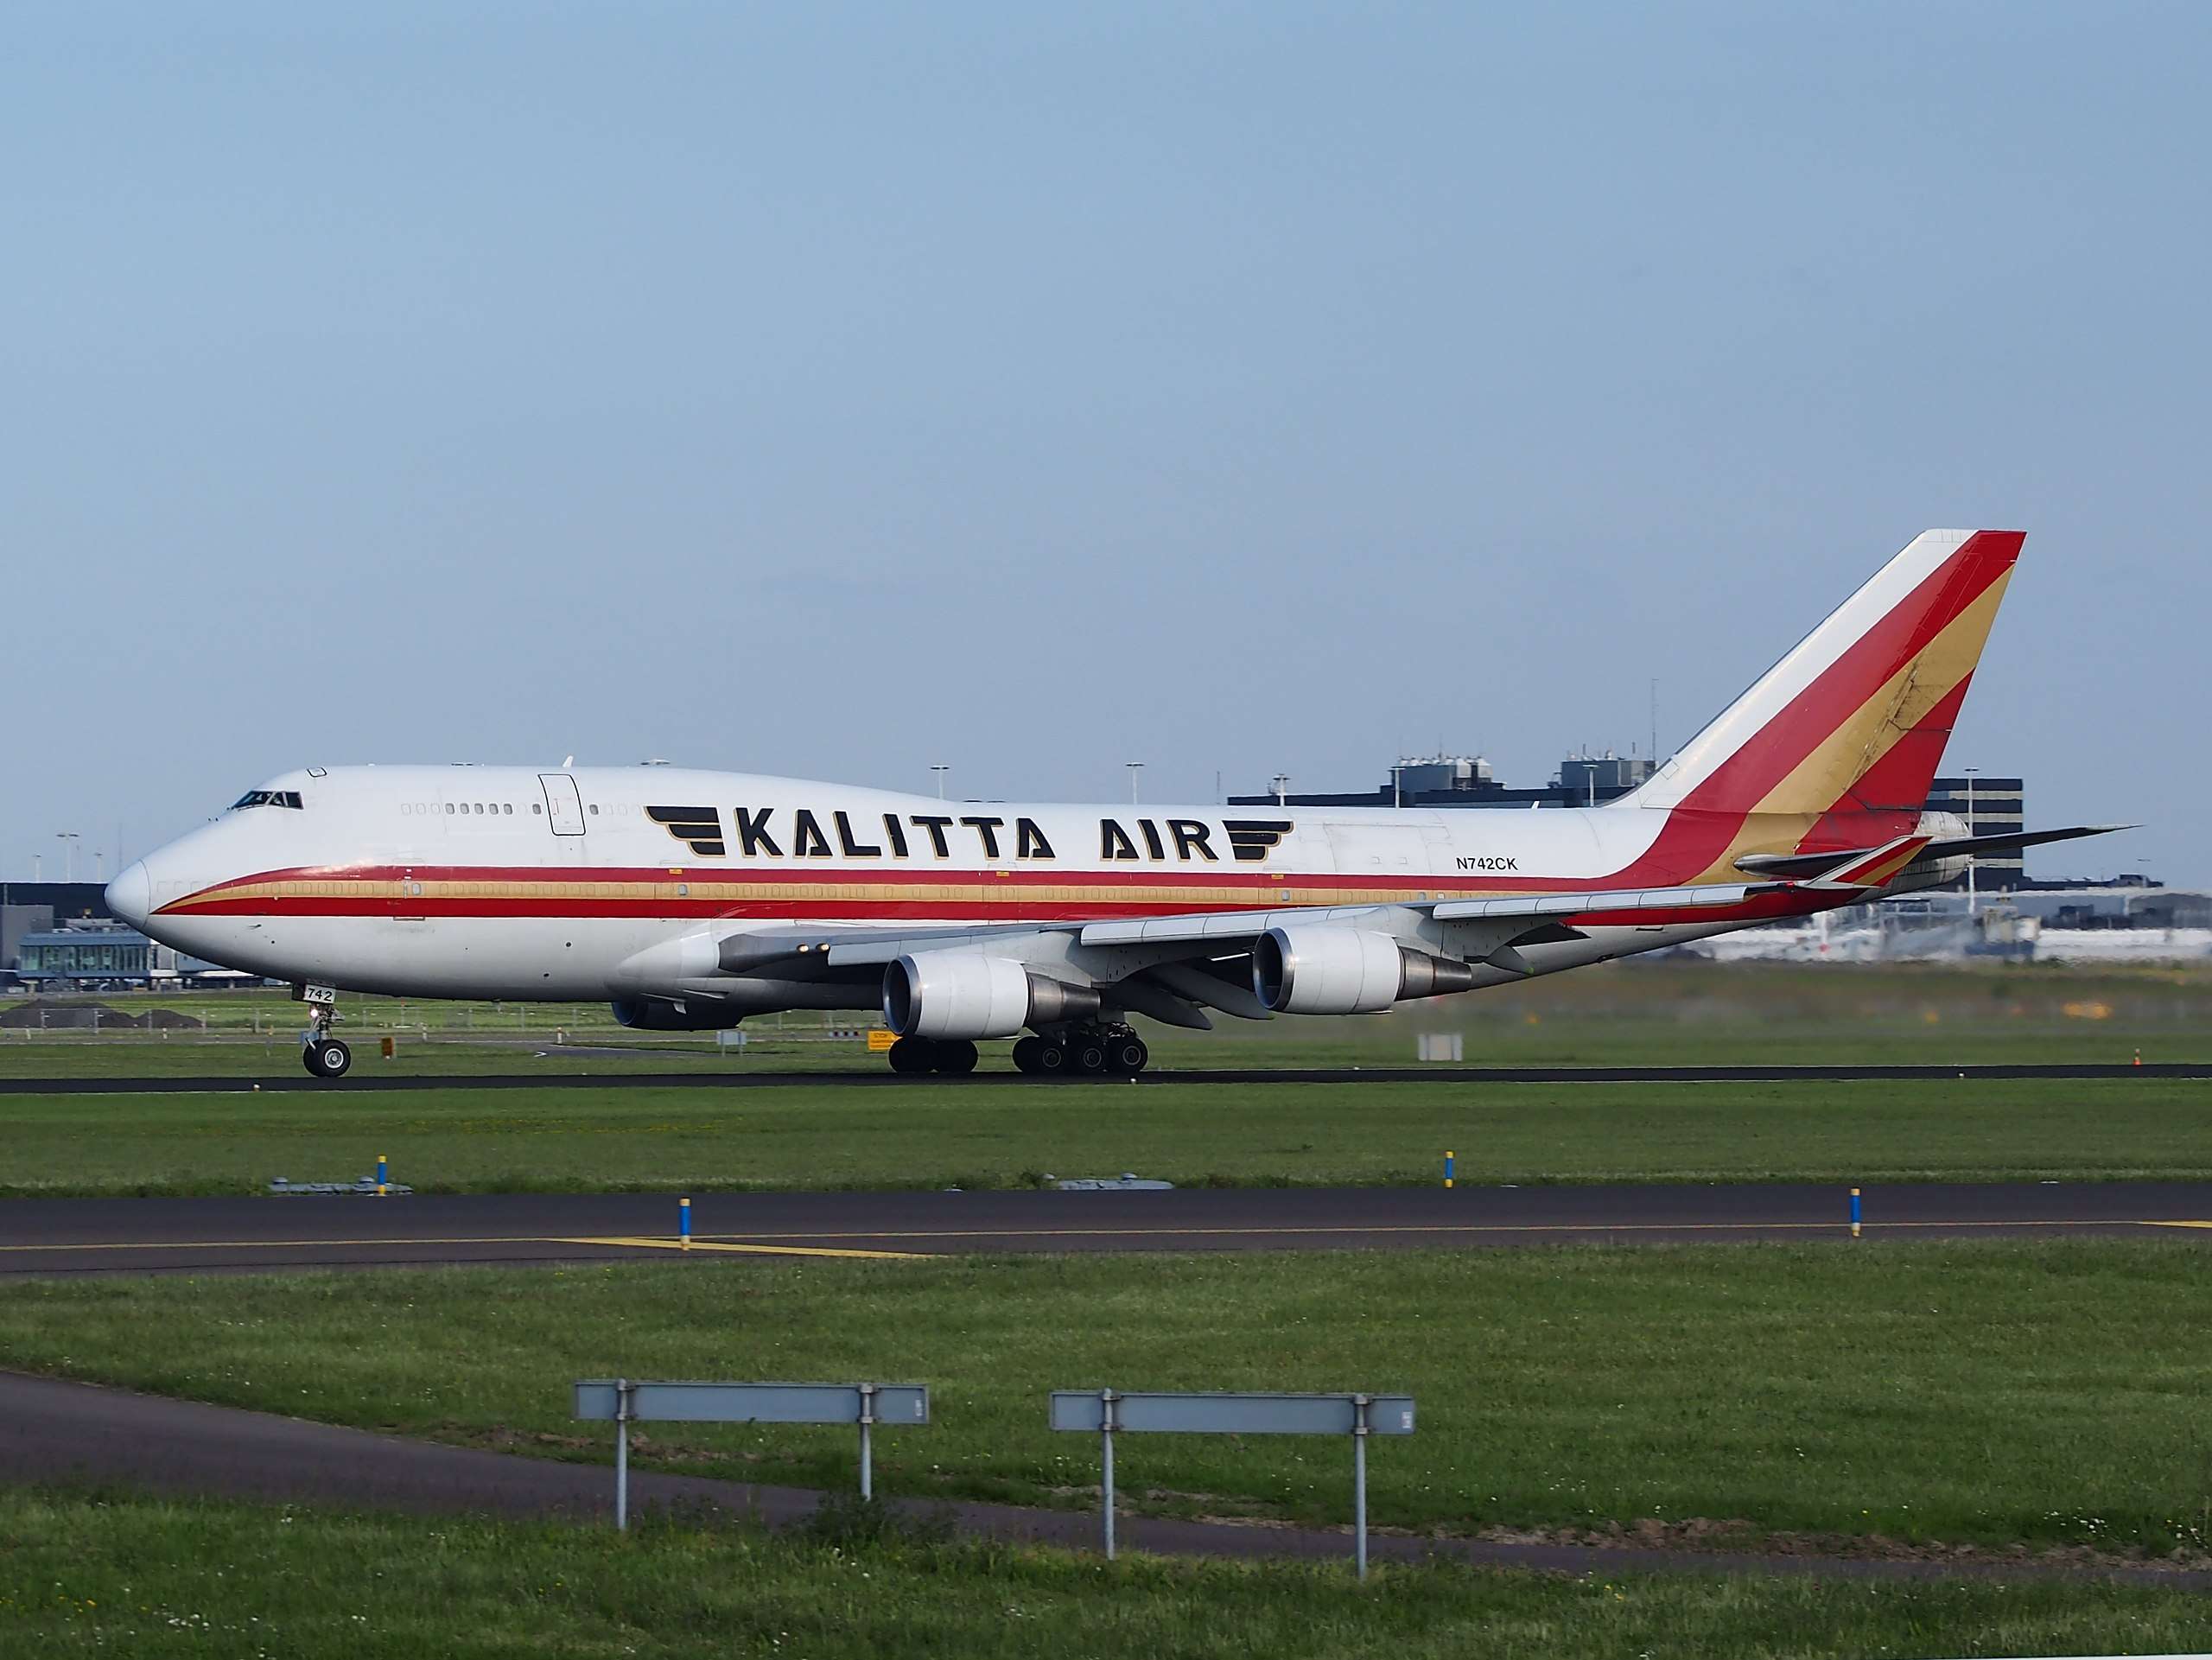 Kalitta Air 747 From Amsterdam to New York Diverts to Leipzig